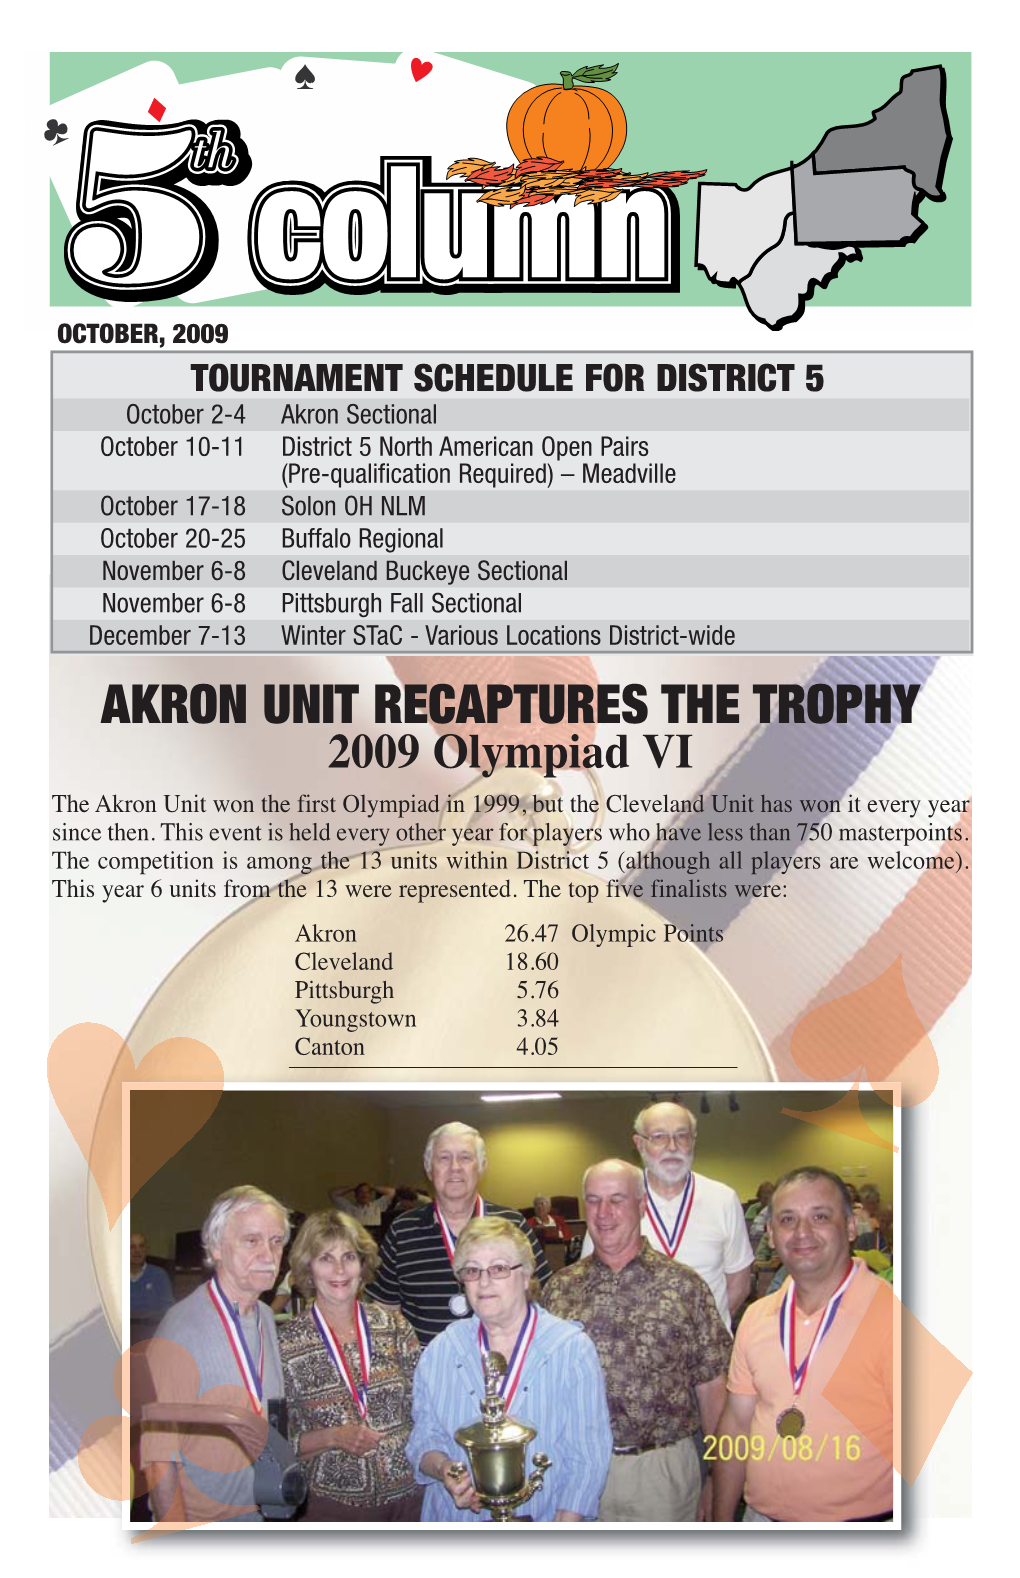 AKRON UNIT RECAPTURES the TROPHY 2009 Olympiad VI the Akron Unit Won the First Olympiad in 1999, but the Cleveland Unit Has Won It Every Year Since Then